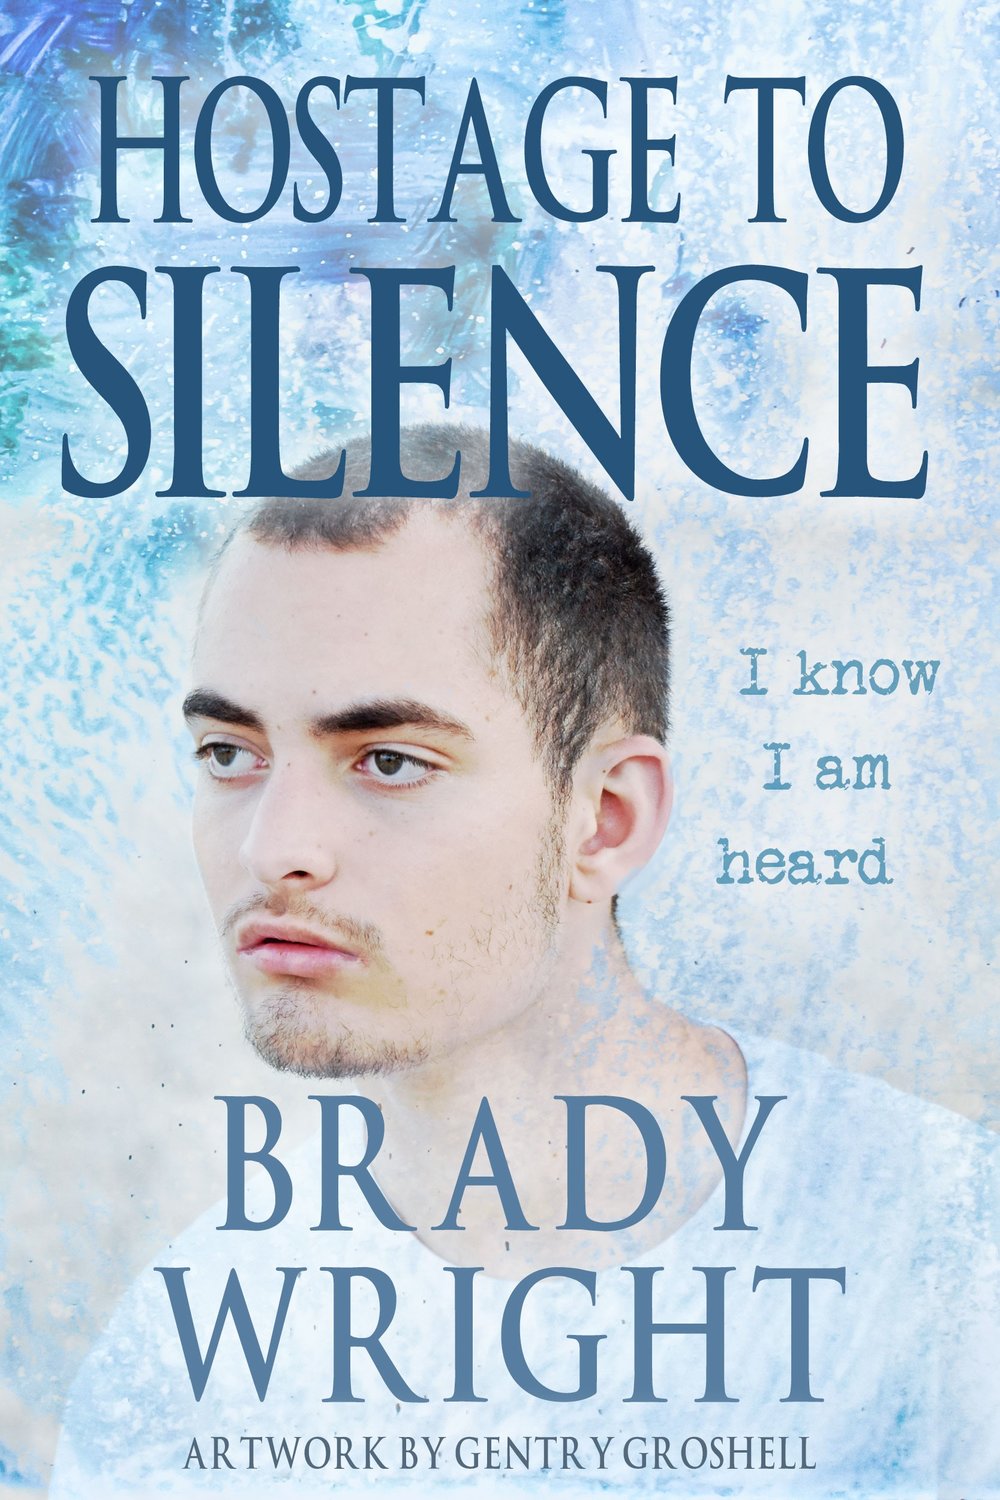 The cover of Brady’s book, ‘Hostage to Silence.’